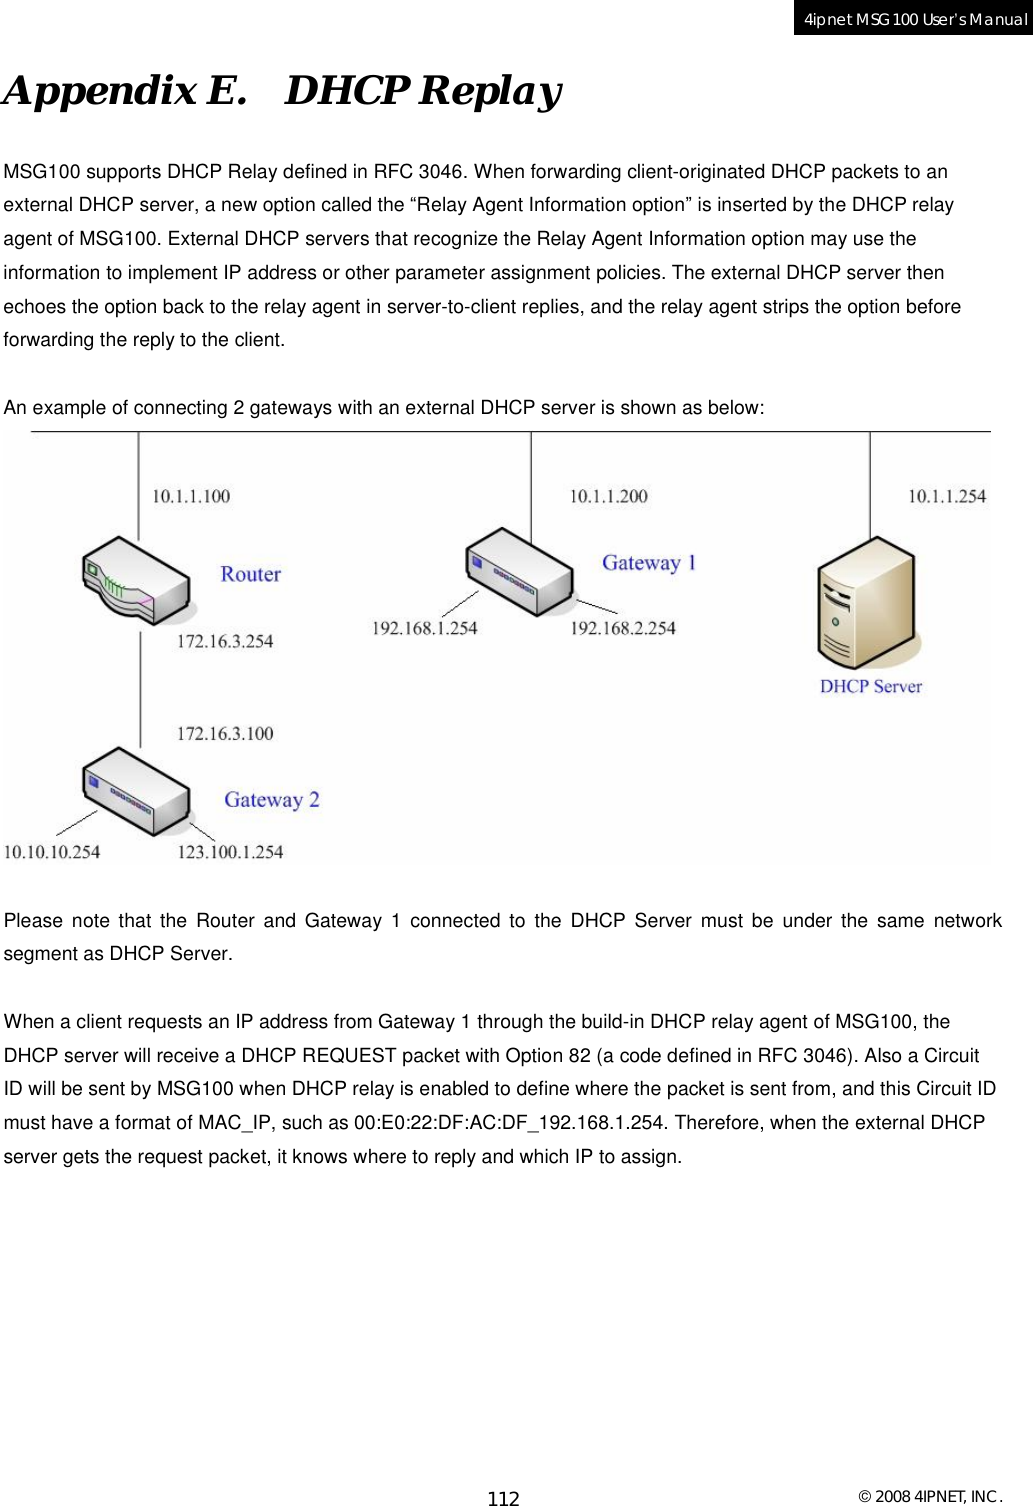  © 2008 4IPNET, INC. 112 4ipnet MSG100 User’s Manual  Appendix E.  DHCP Replay MSG100 supports DHCP Relay defined in RFC 3046. When forwarding client-originated DHCP packets to an external DHCP server, a new option called the “Relay Agent Information option” is inserted by the DHCP relay agent of MSG100. External DHCP servers that recognize the Relay Agent Information option may use the information to implement IP address or other parameter assignment policies. The external DHCP server then echoes the option back to the relay agent in server-to-client replies, and the relay agent strips the option before forwarding the reply to the client.  An example of connecting 2 gateways with an external DHCP server is shown as below:   Please note that the Router and Gateway 1 connected to the DHCP Server must be under the same network segment as DHCP Server.   When a client requests an IP address from Gateway 1 through the build-in DHCP relay agent of MSG100, the DHCP server will receive a DHCP REQUEST packet with Option 82 (a code defined in RFC 3046). Also a Circuit ID will be sent by MSG100 when DHCP relay is enabled to define where the packet is sent from, and this Circuit ID must have a format of MAC_IP, such as 00:E0:22:DF:AC:DF_192.168.1.254. Therefore, when the external DHCP server gets the request packet, it knows where to reply and which IP to assign.       